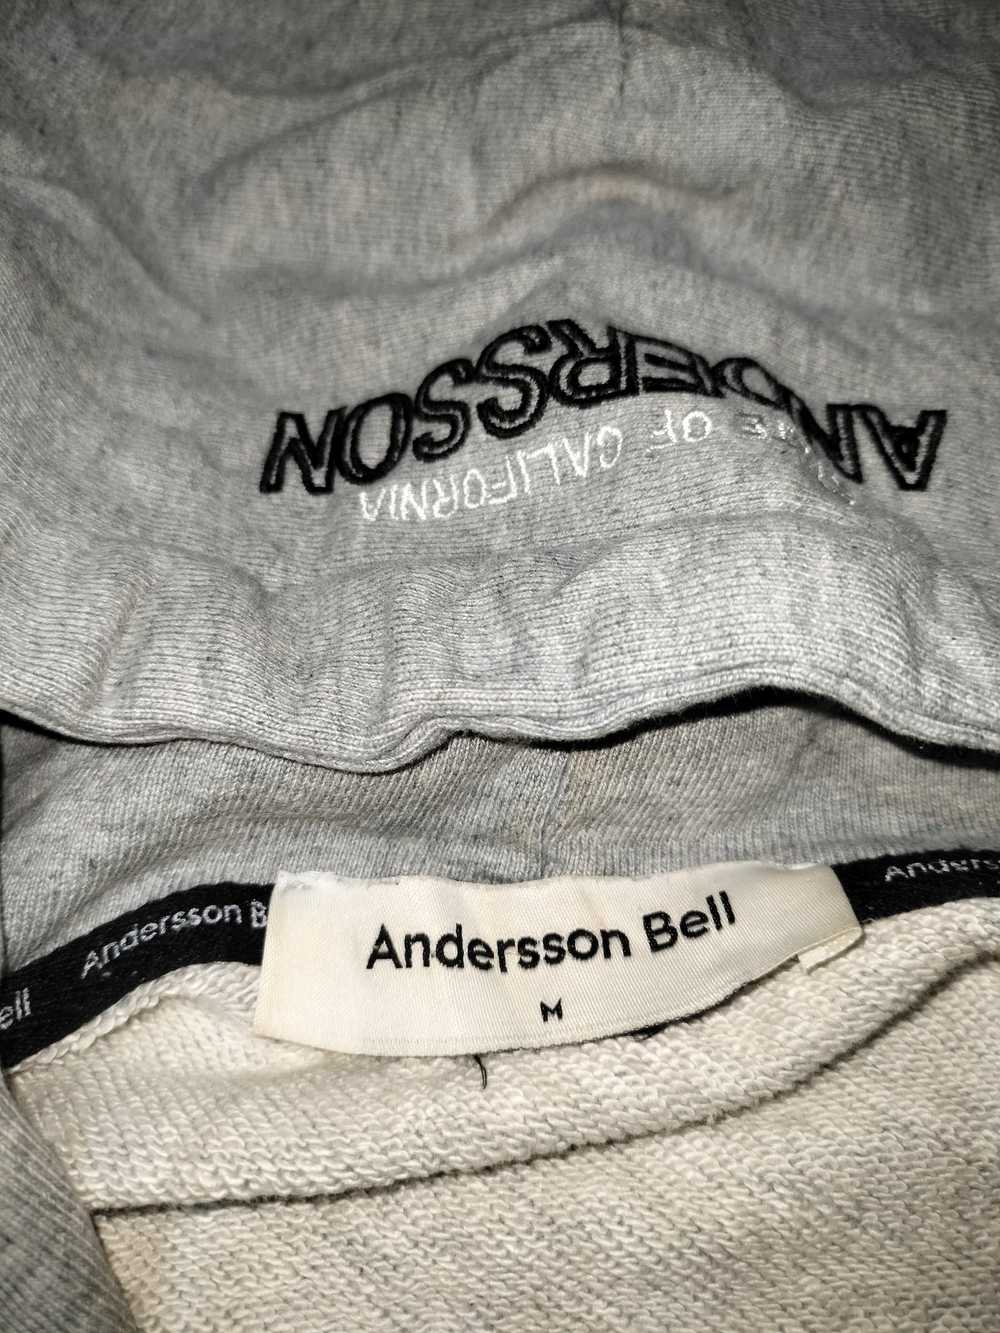 Andersson Bell Anderson Bell " I Found My Self in… - image 6